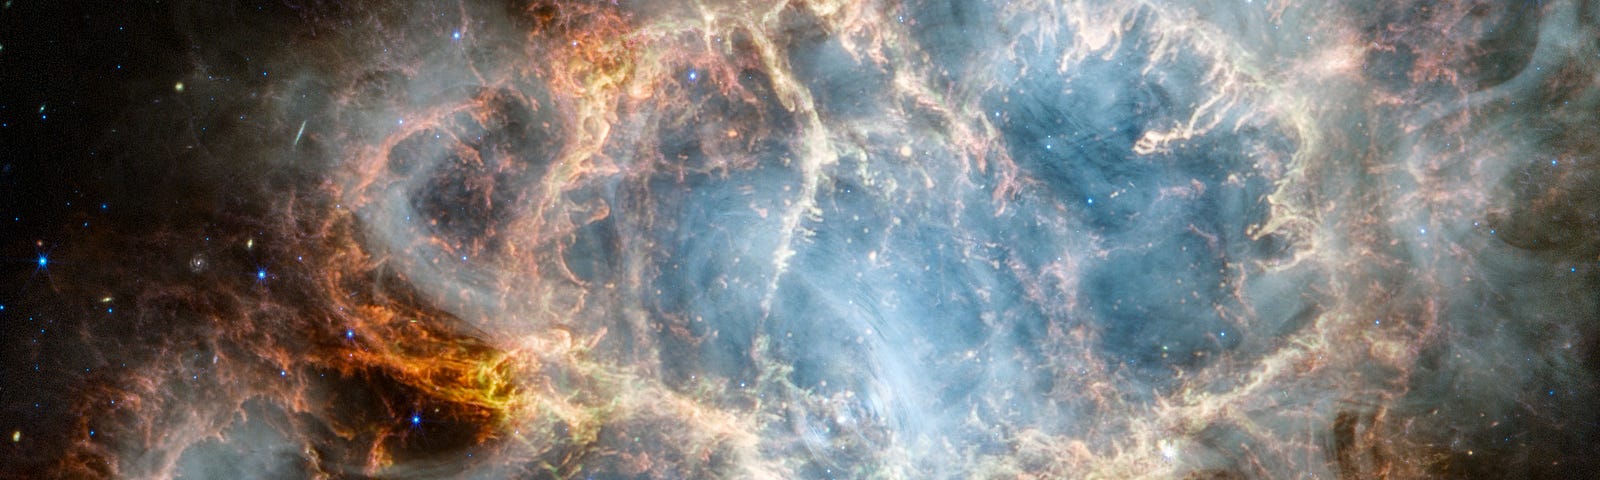 A veiny, large cloud structure fills the image. The middle is a blue haze, surrounded by wisps of orange, yellow, and white light.